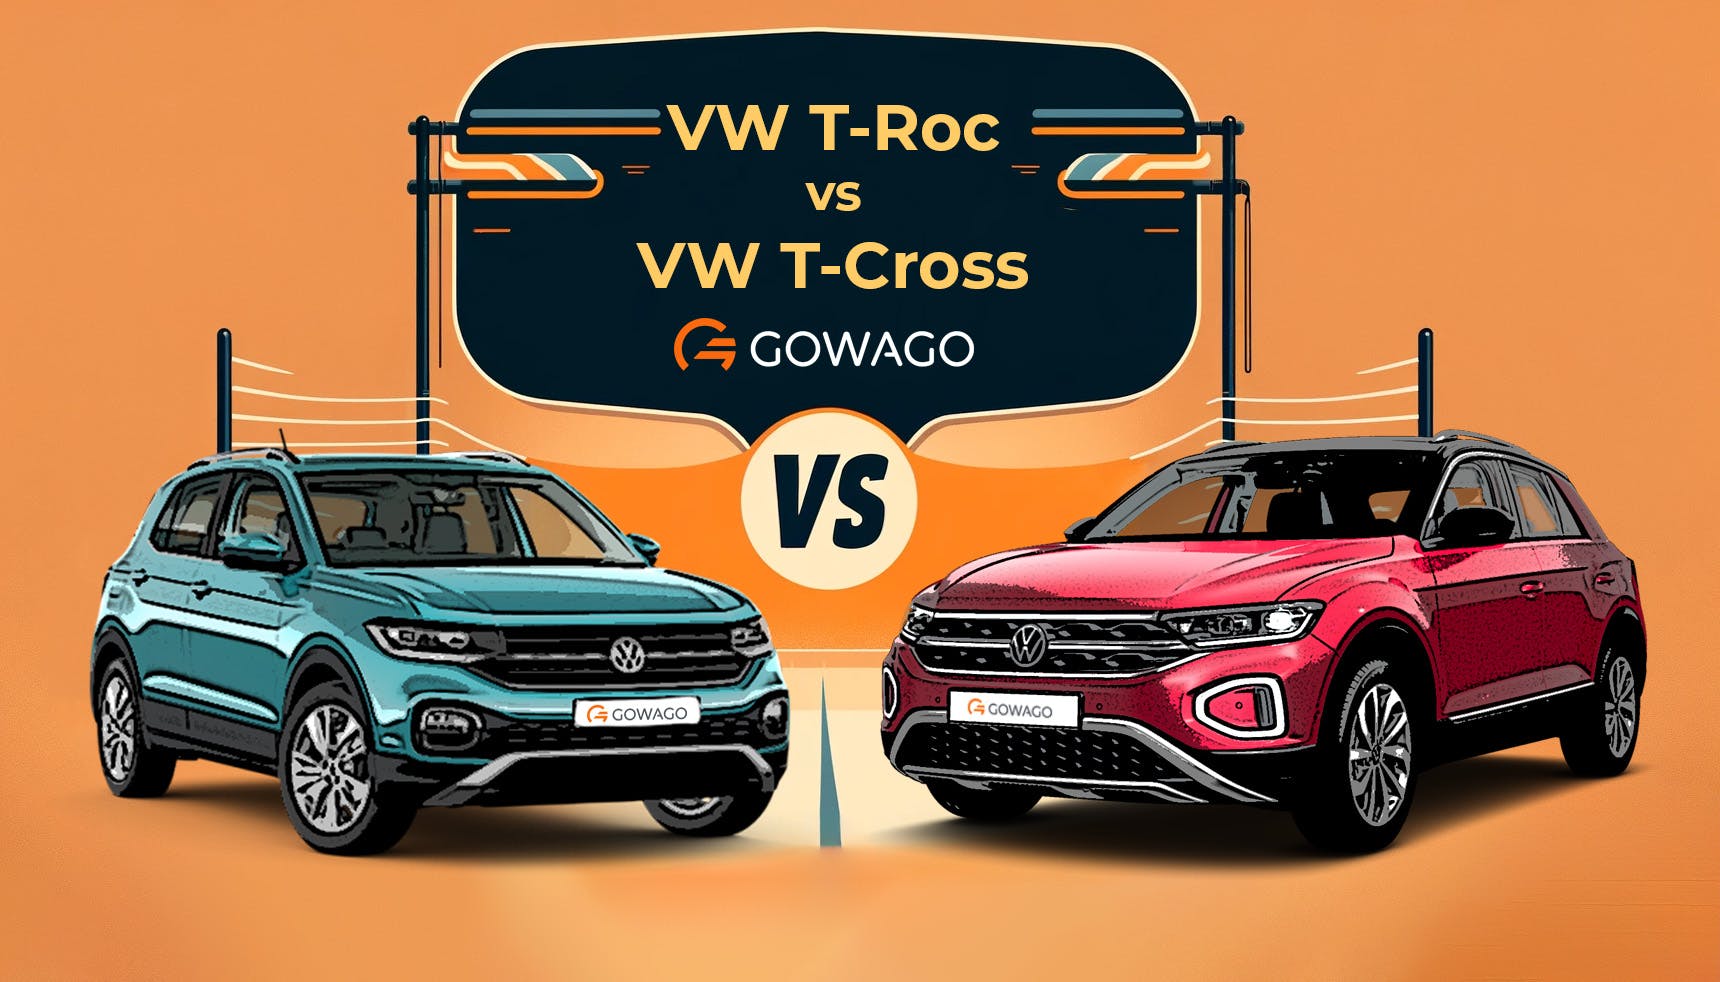 blog item card - VW T-Roc vs VW T-Cross: Discover the differences between these similar SUVs and make the right choice for your next lease! Which has more space, has a better price, which suits your needs more?